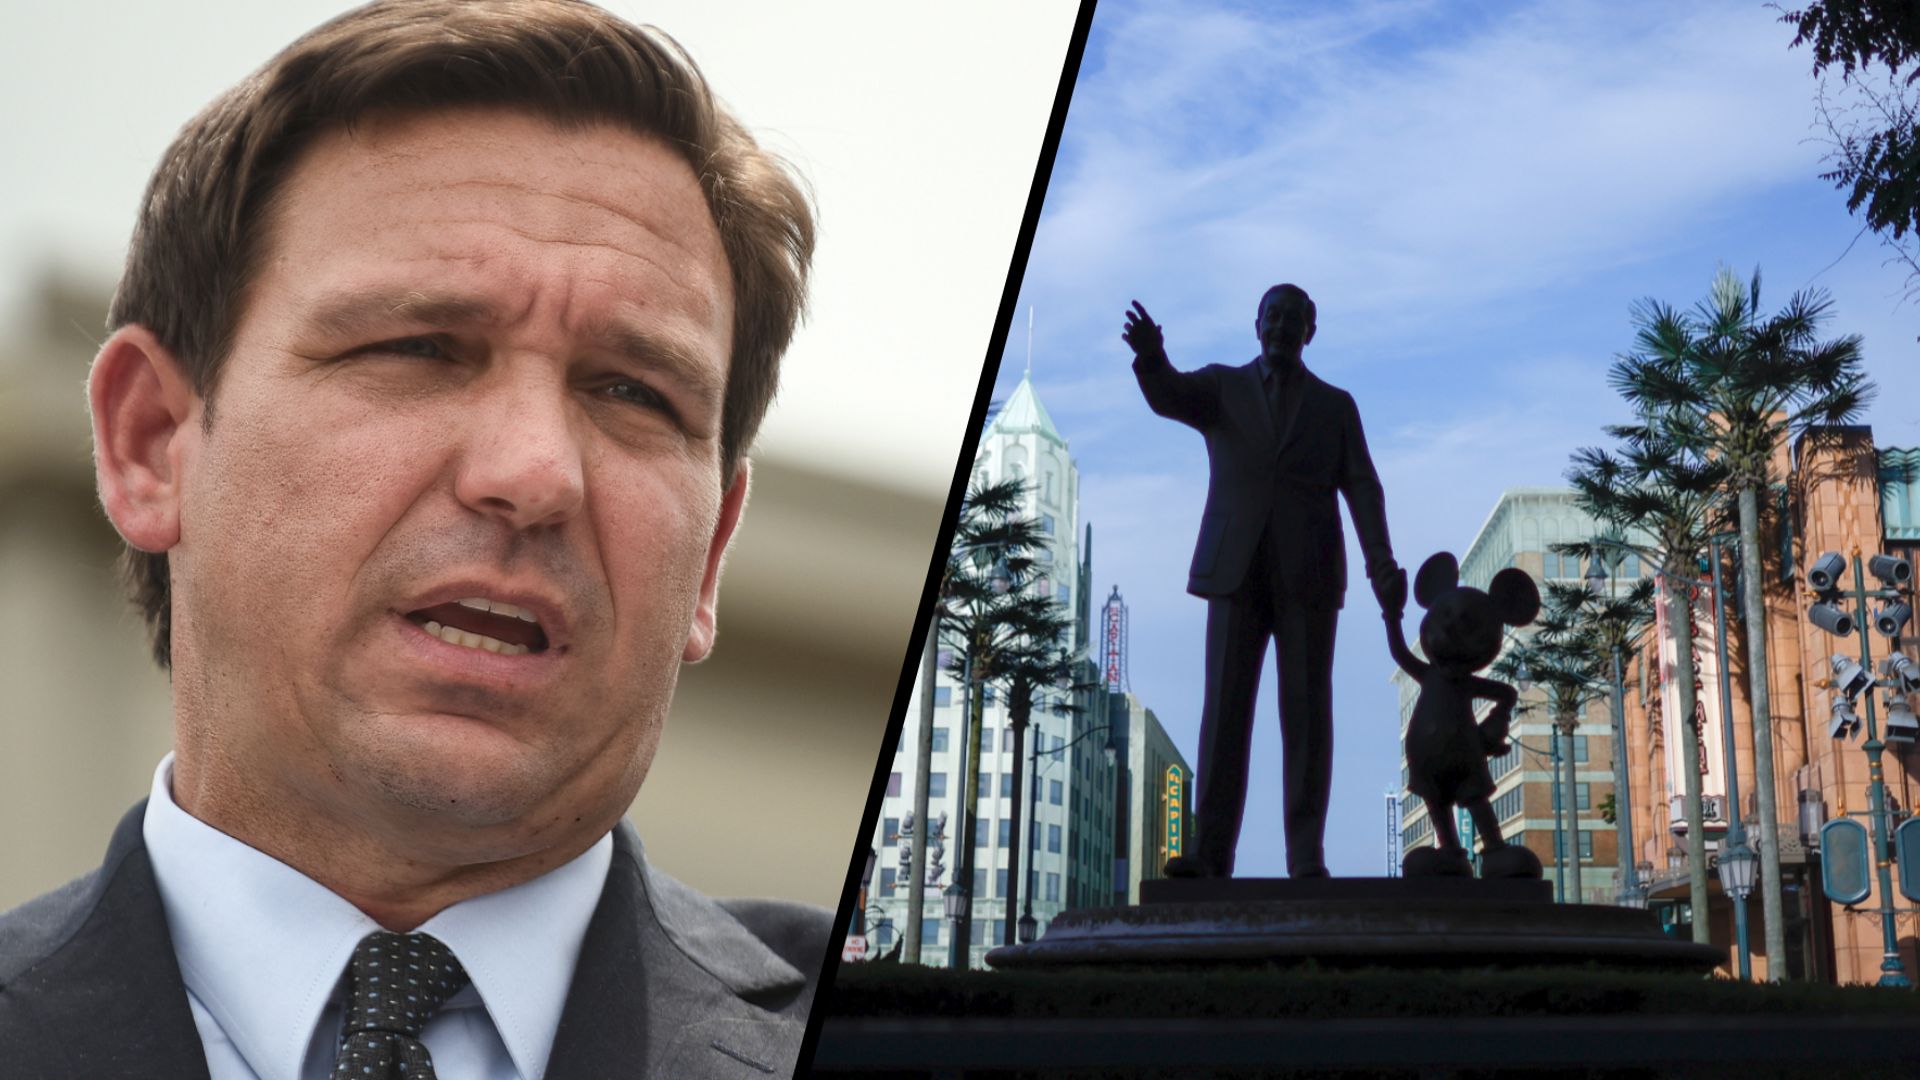 Florida Gov. Ron DeSantis told a supportive crowd that he's not backing down from his fight with Disney despite increased GOP opposition.